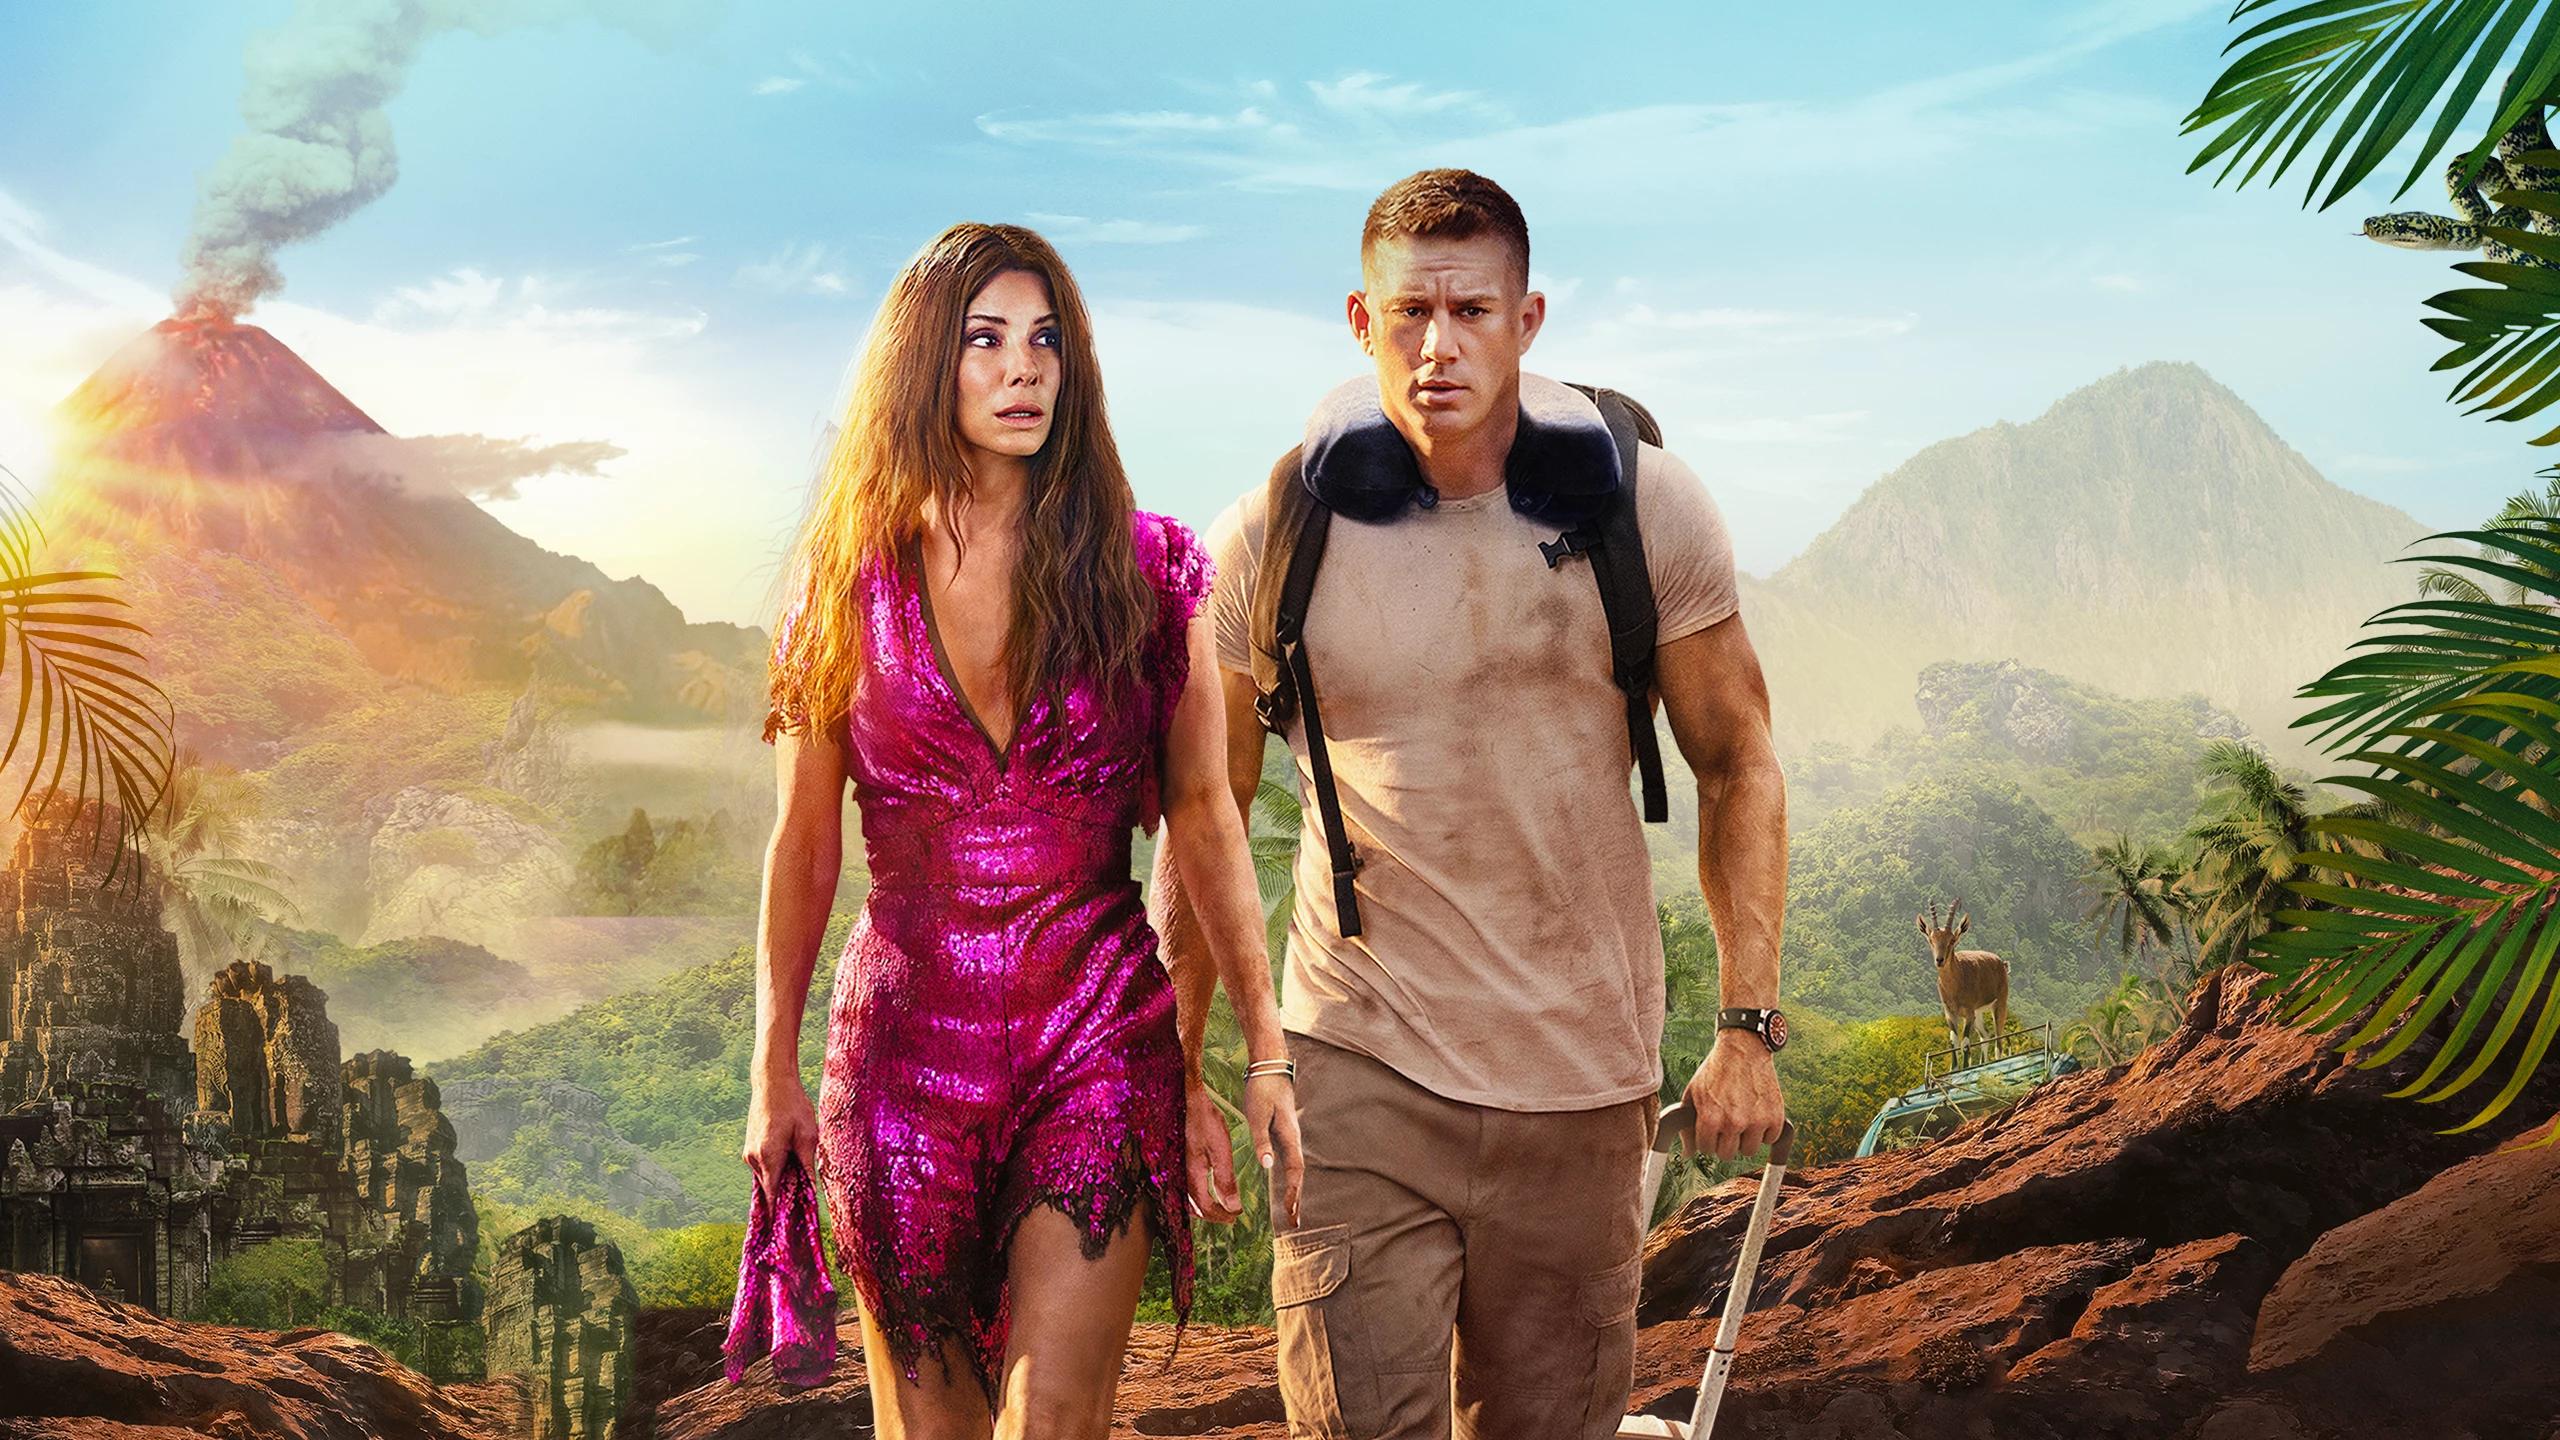 the lost city movie review plugged in